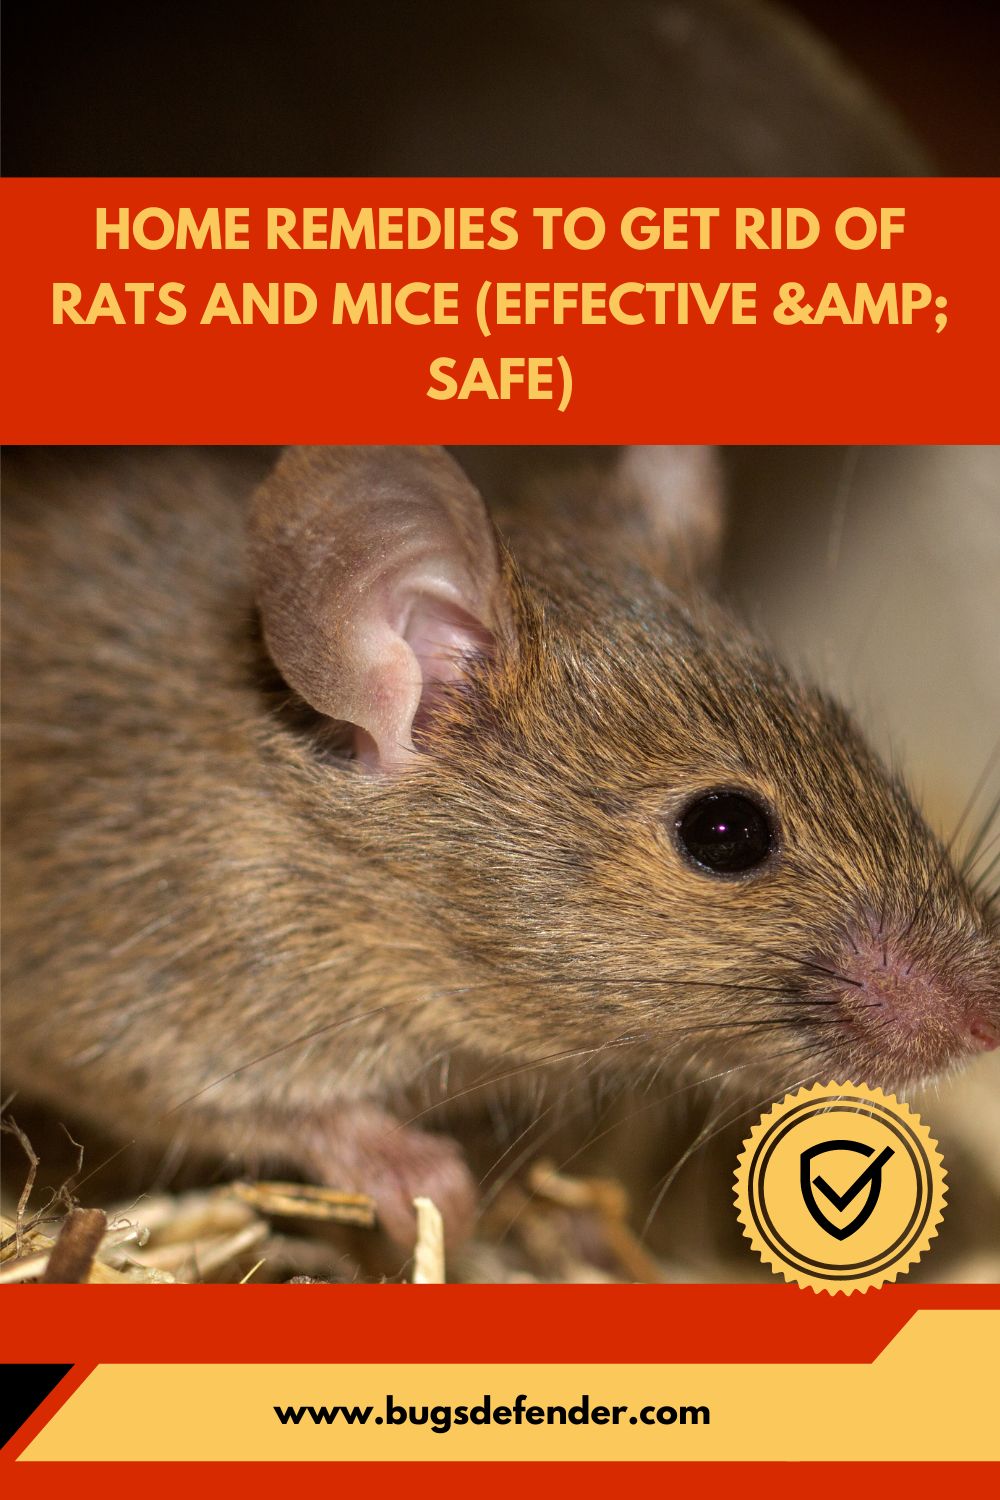 Home Remedies to Get Rid of Rats and Mice (Effective & Safe) pin2